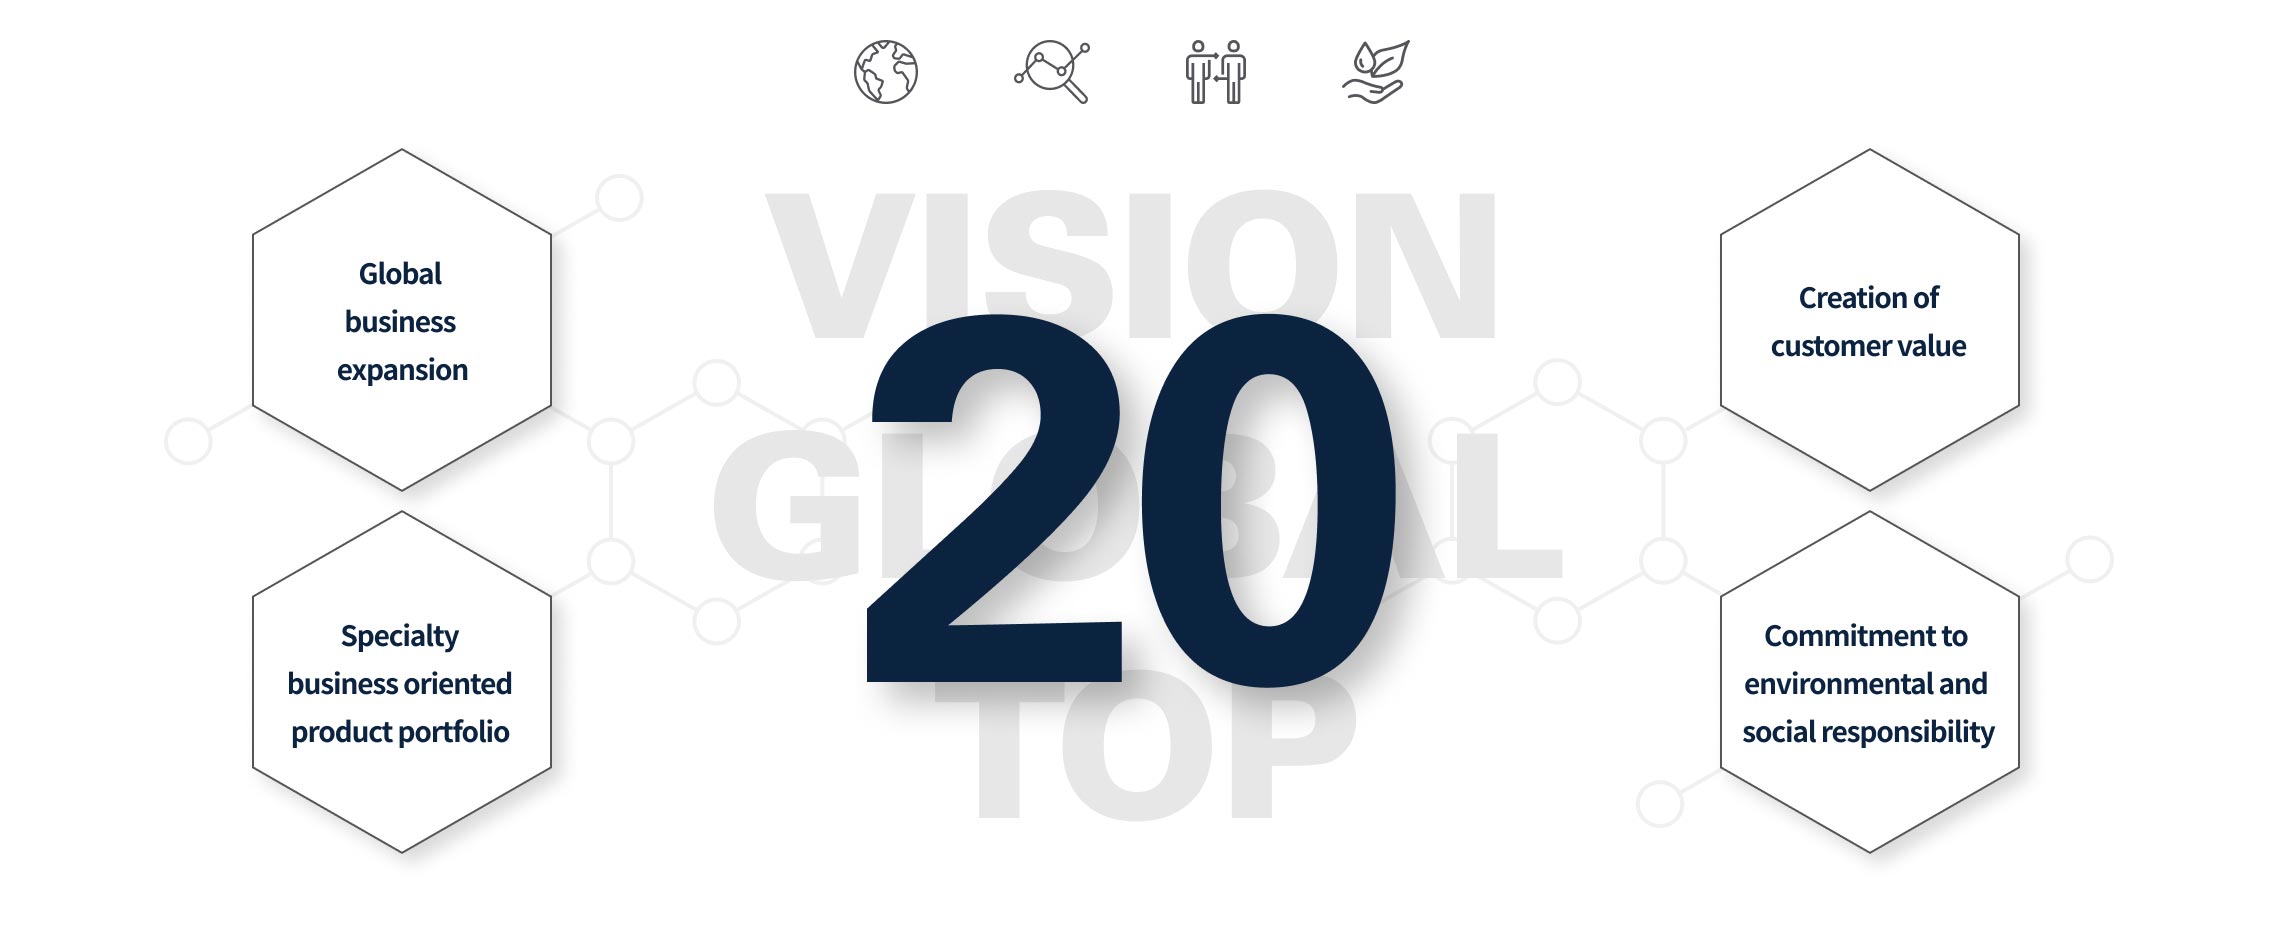 VISION GLOBAL TOP 20, Global business expansion, Specialty business Portfolio expansion, Customer value creation, Practicing environmental and social responsibility